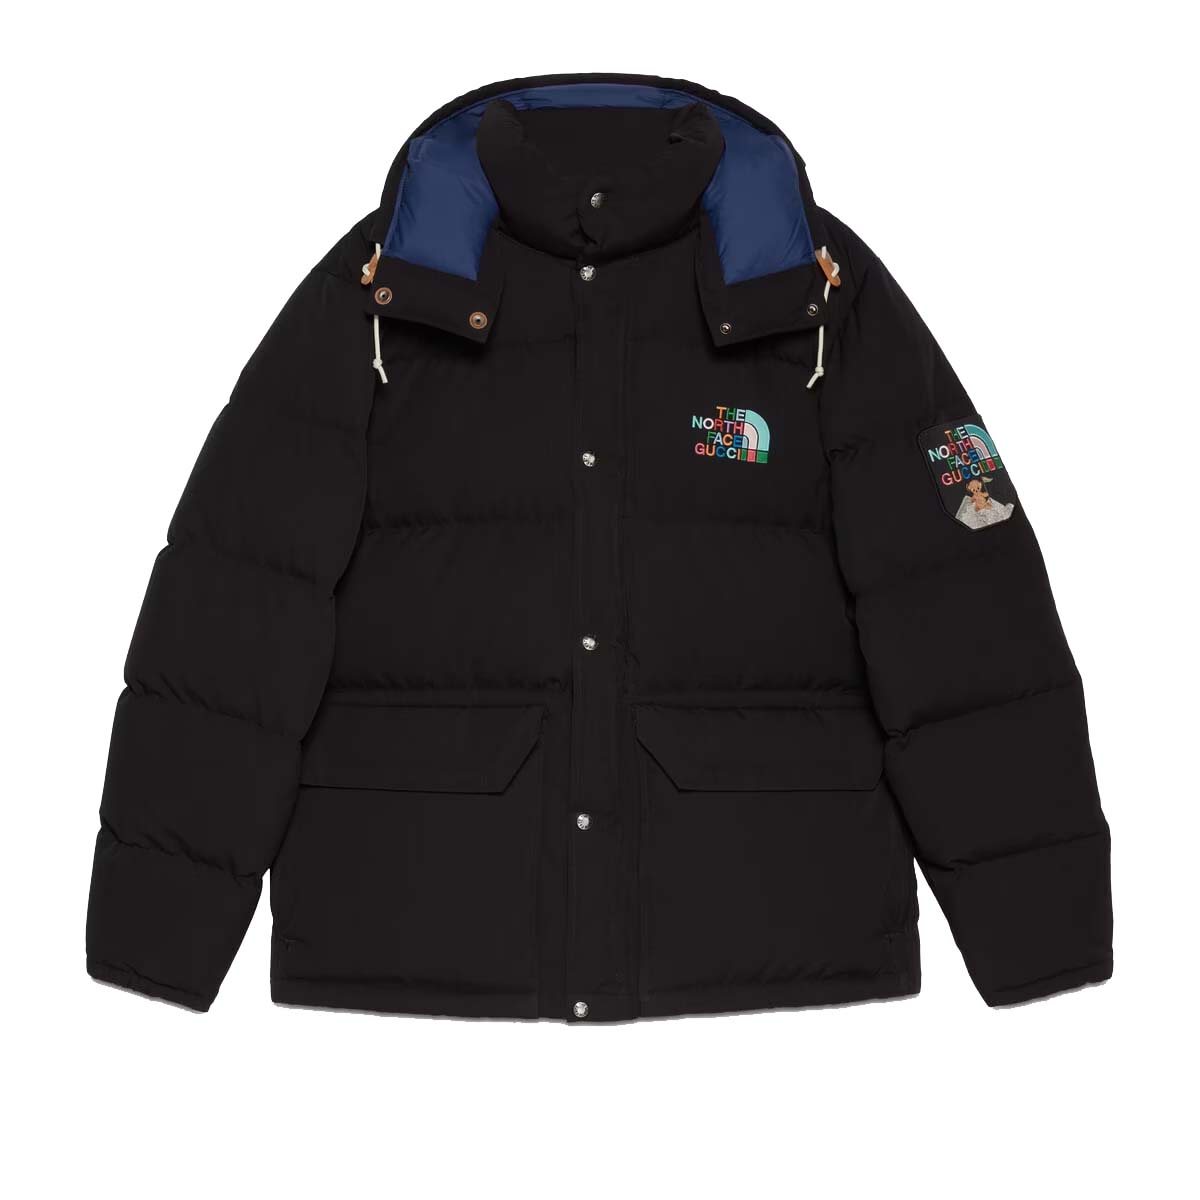 Gucci x The North Face Down Jacket Black メンズ - FW22 - JP